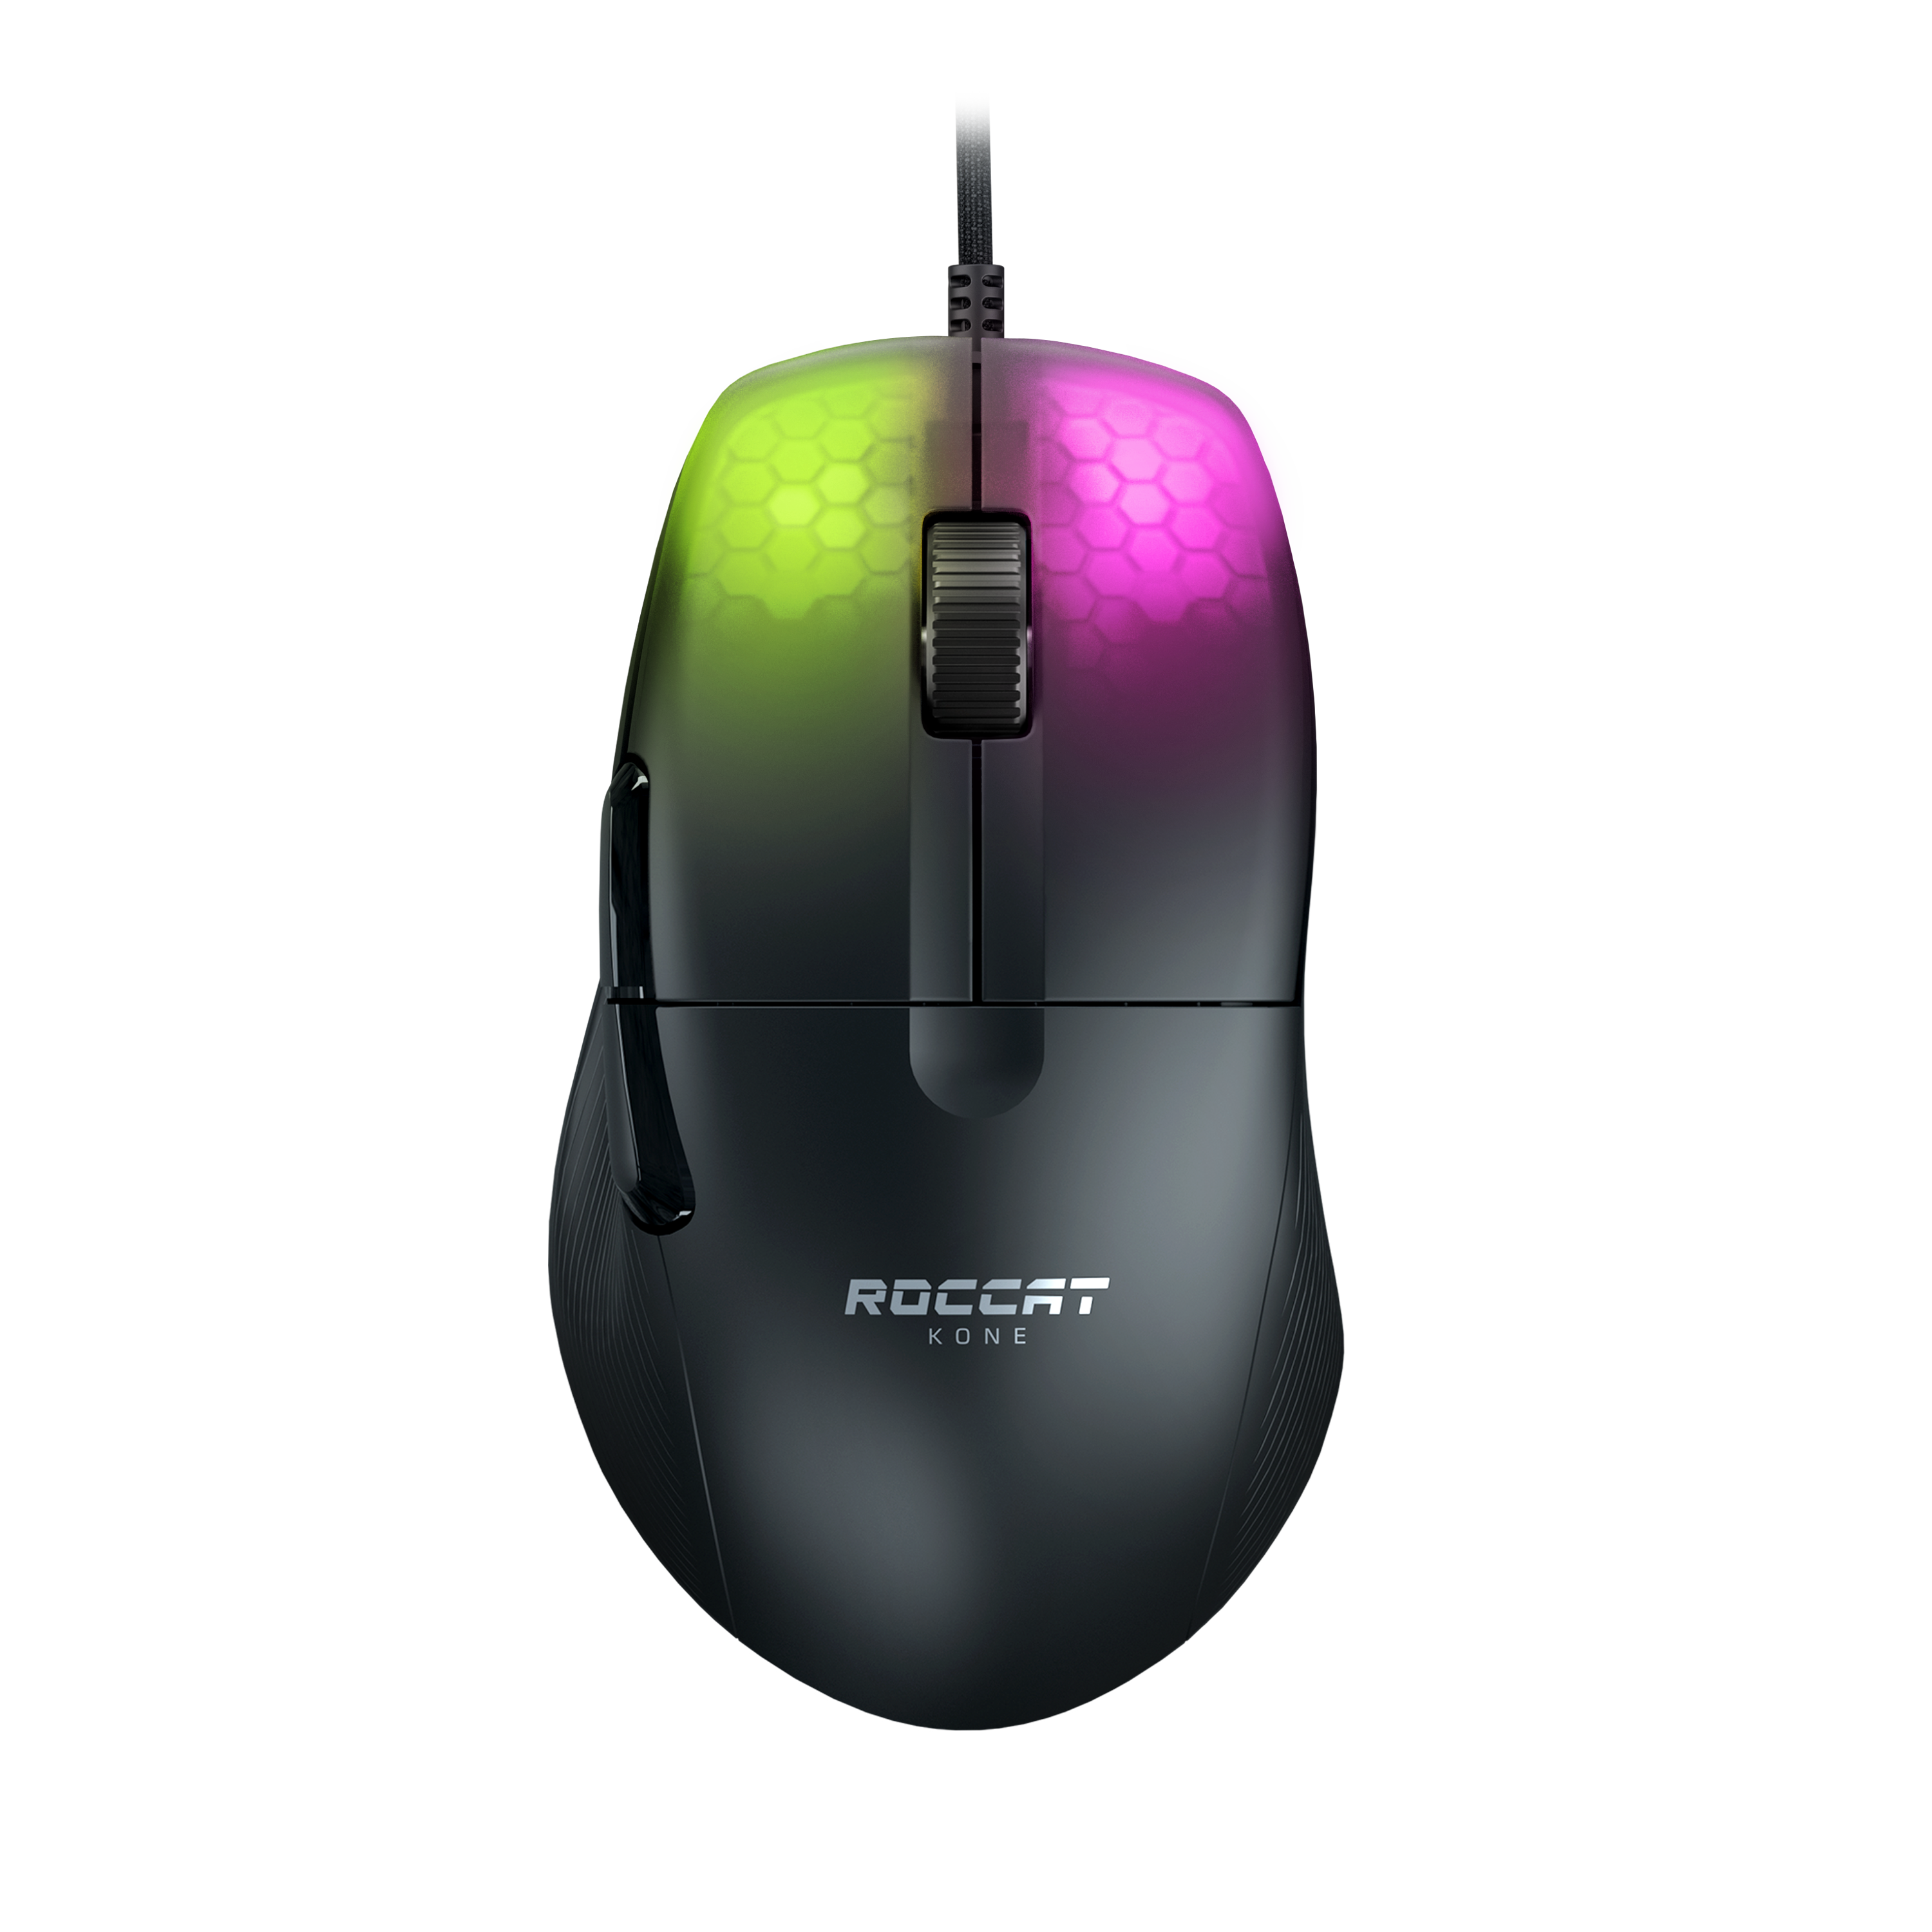 ROCCAT Kone Pro PC Gaming Mouse, Lightweight Ergonomic Design, Titan Switch Optical, AIMO RGB Lighting, Superlight Wired Computer Mouse, Titan Scroll Wheel, Honeycomb Shell, 19K DPI, Black - image 1 of 7